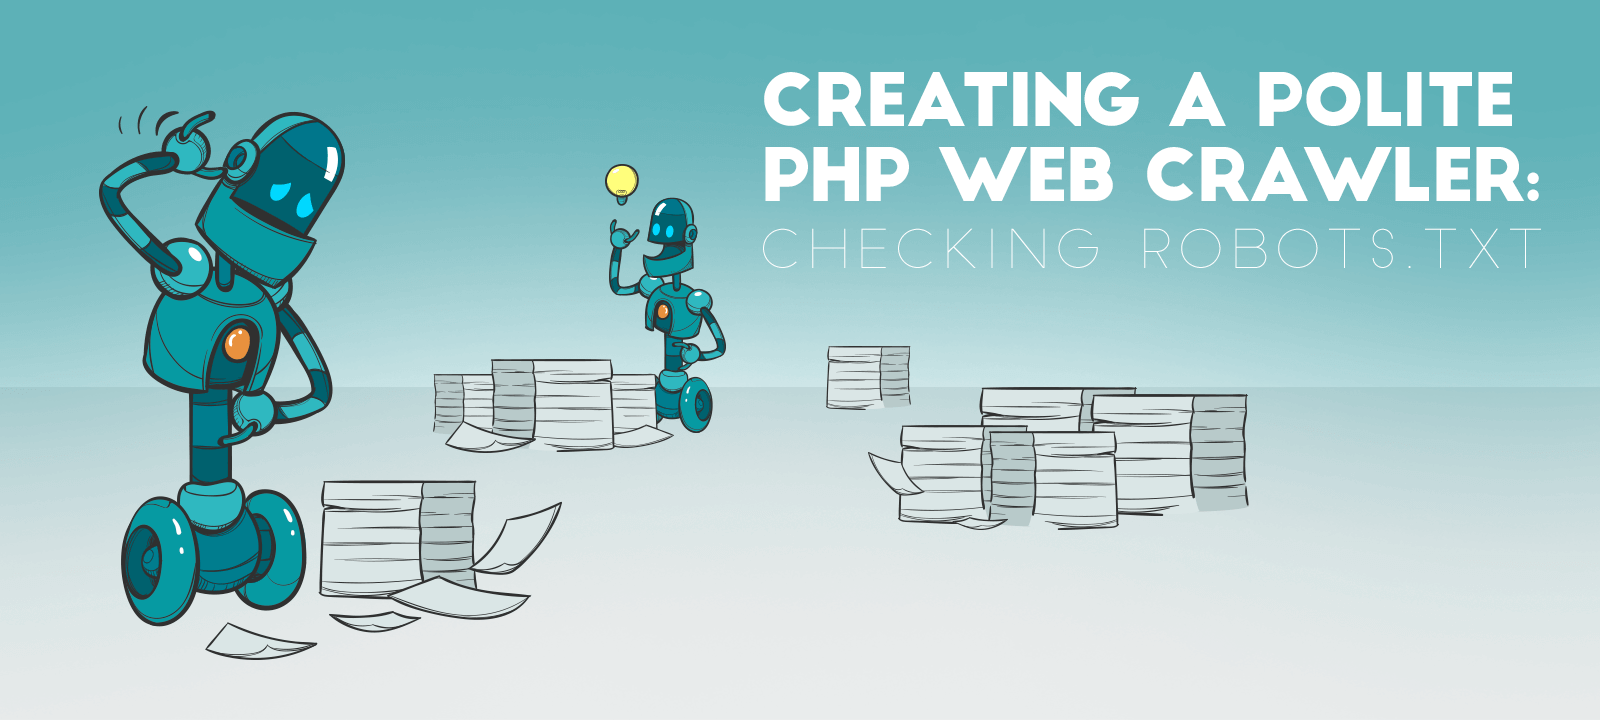 How to create a polite PHP web crawler using robot.txt.